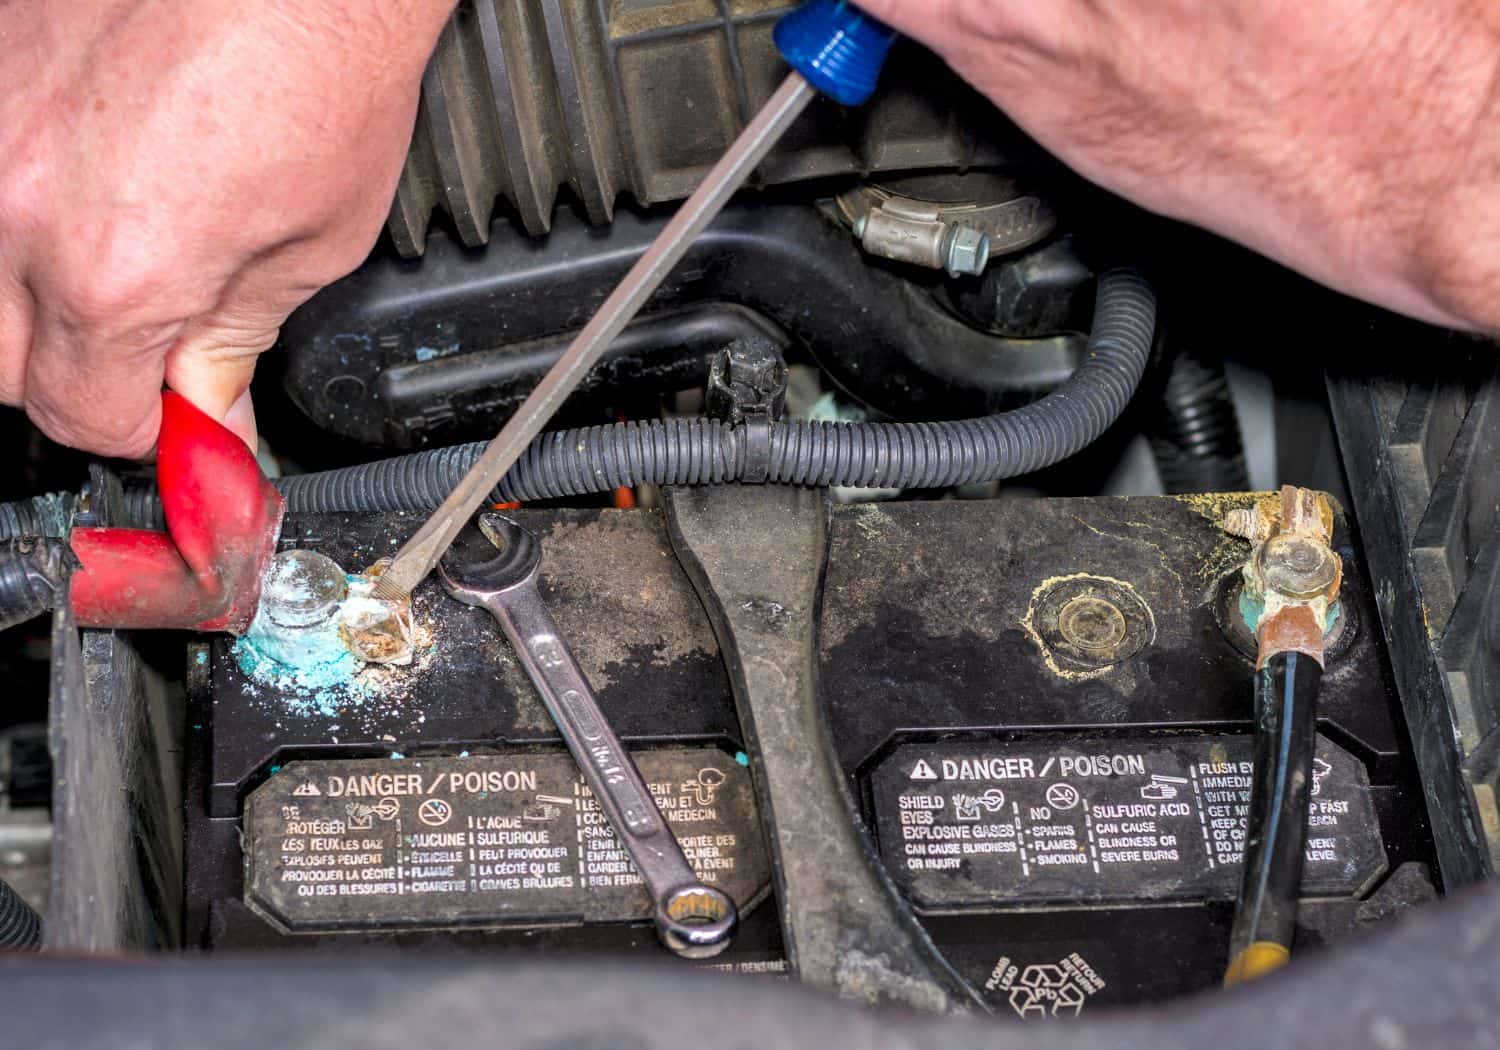 What happens if you smell battery fumes or touch lead acid?